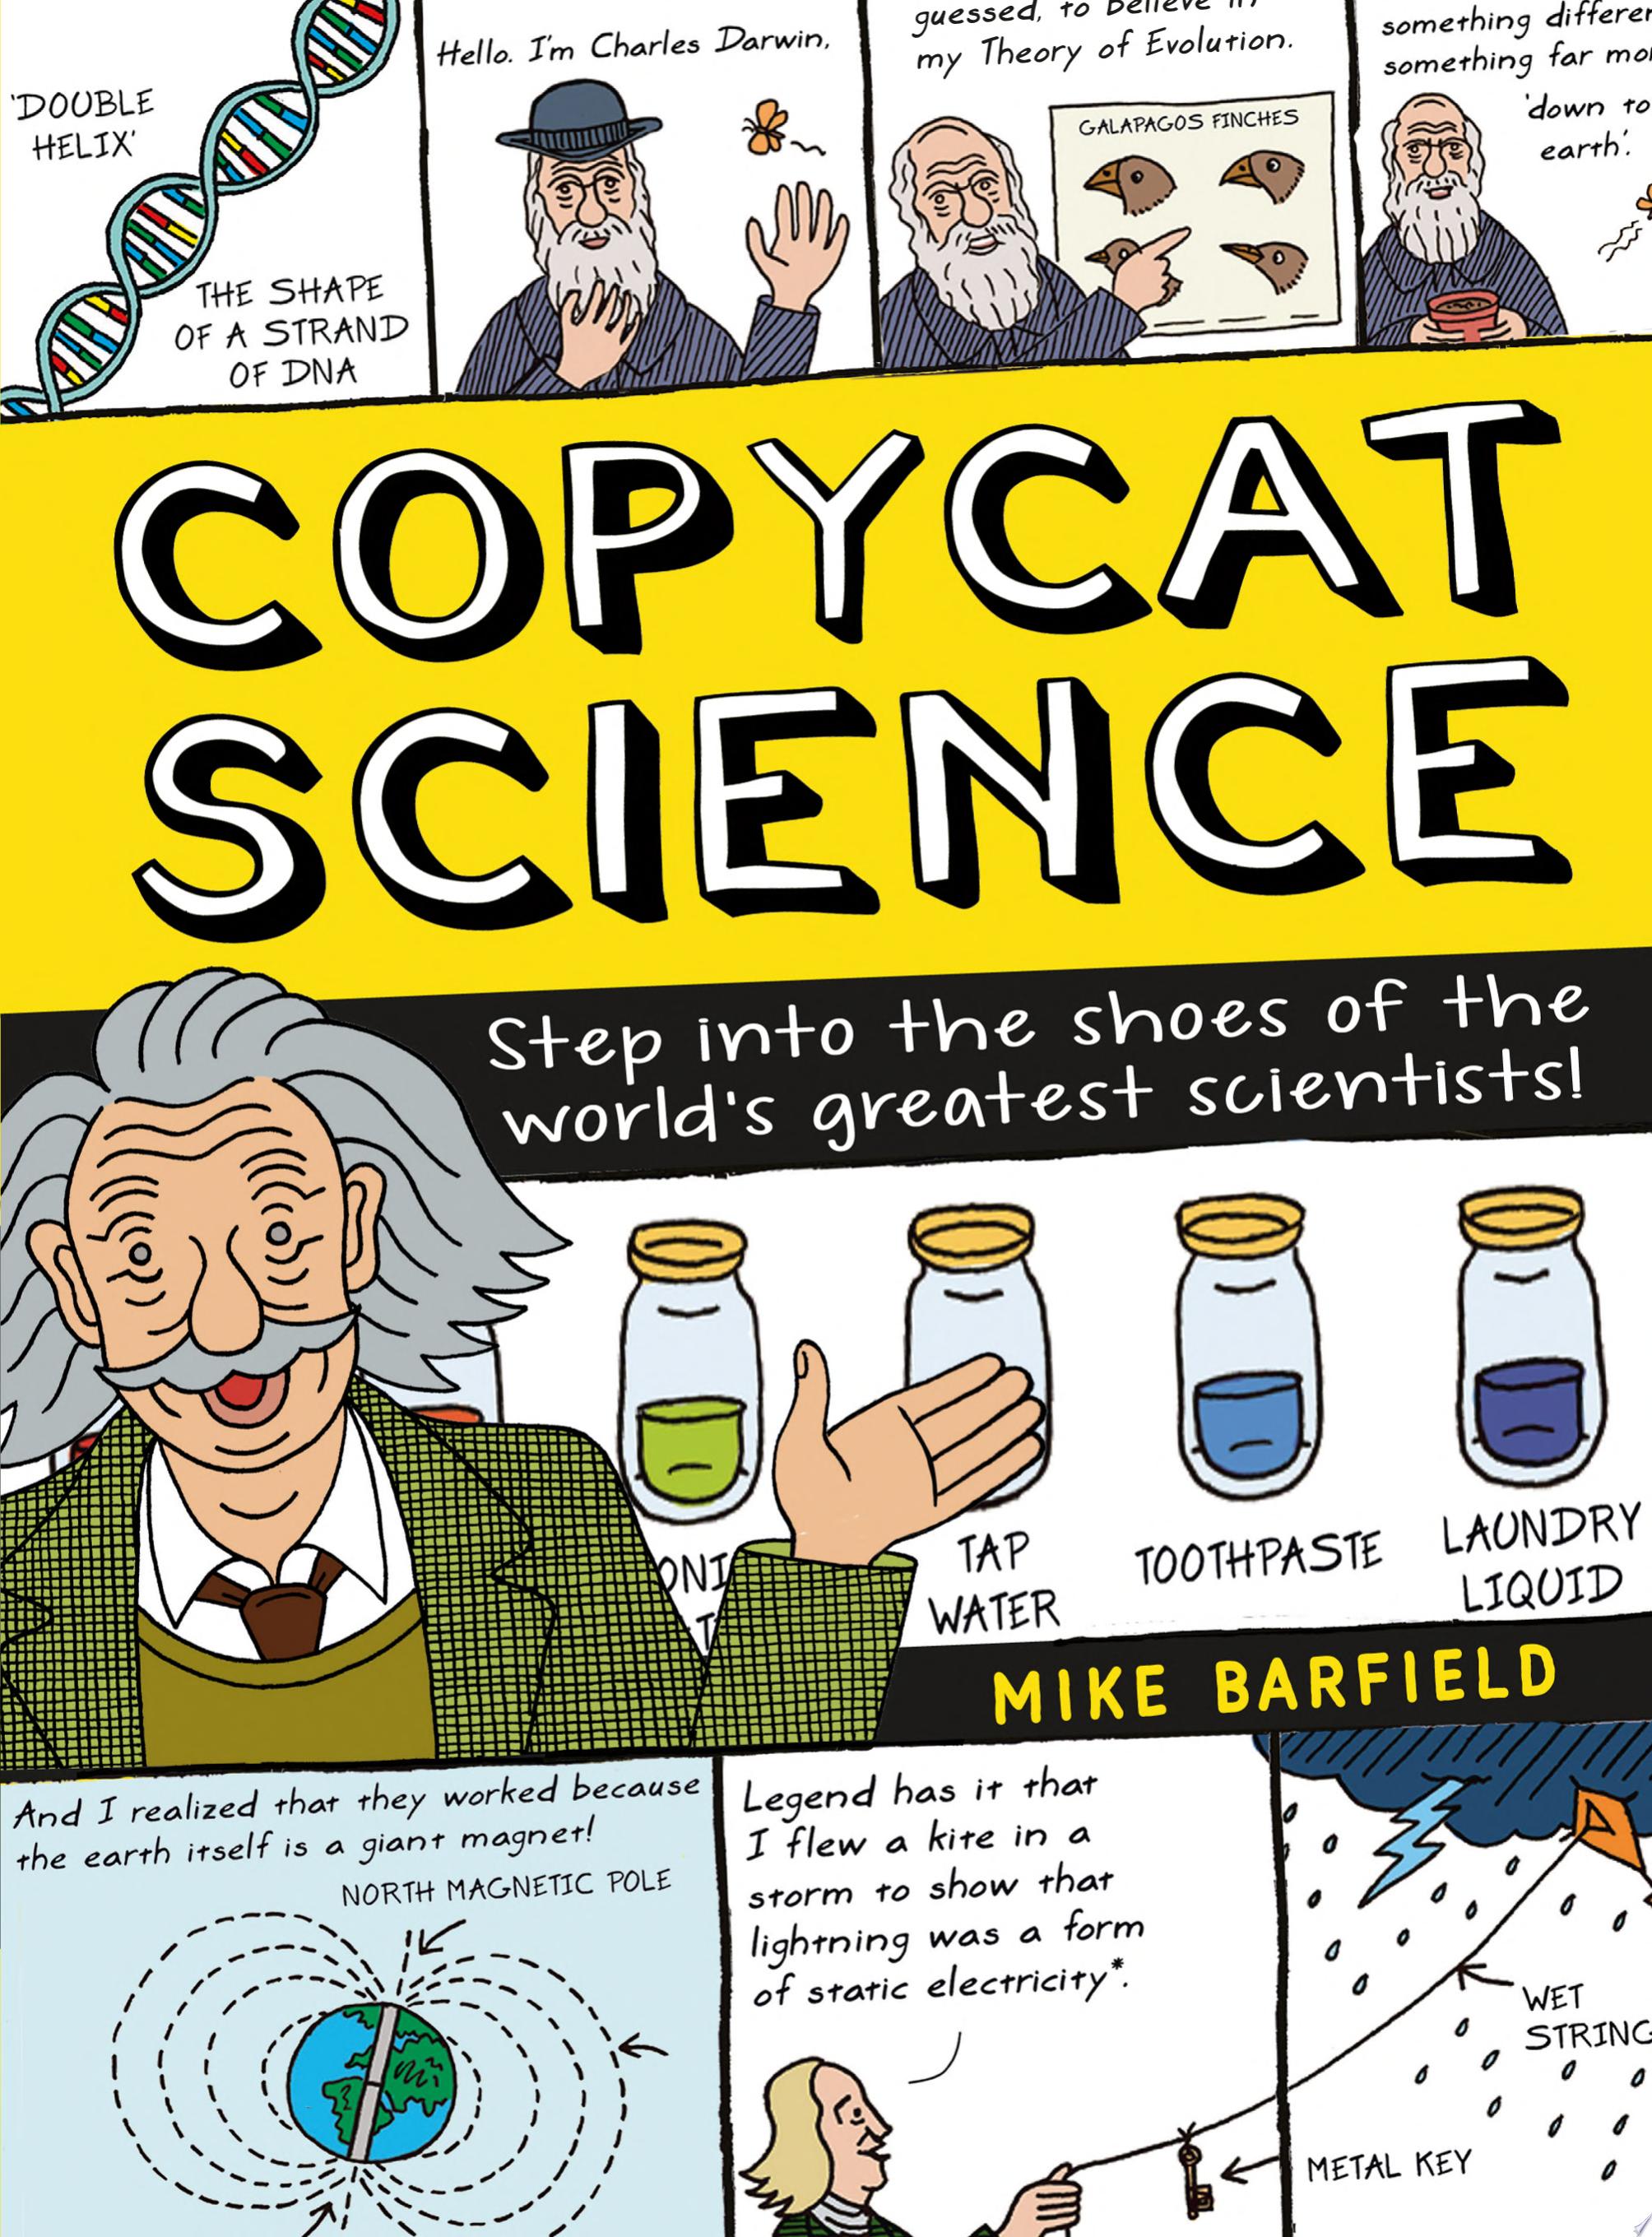 Image for "Copycat Science"